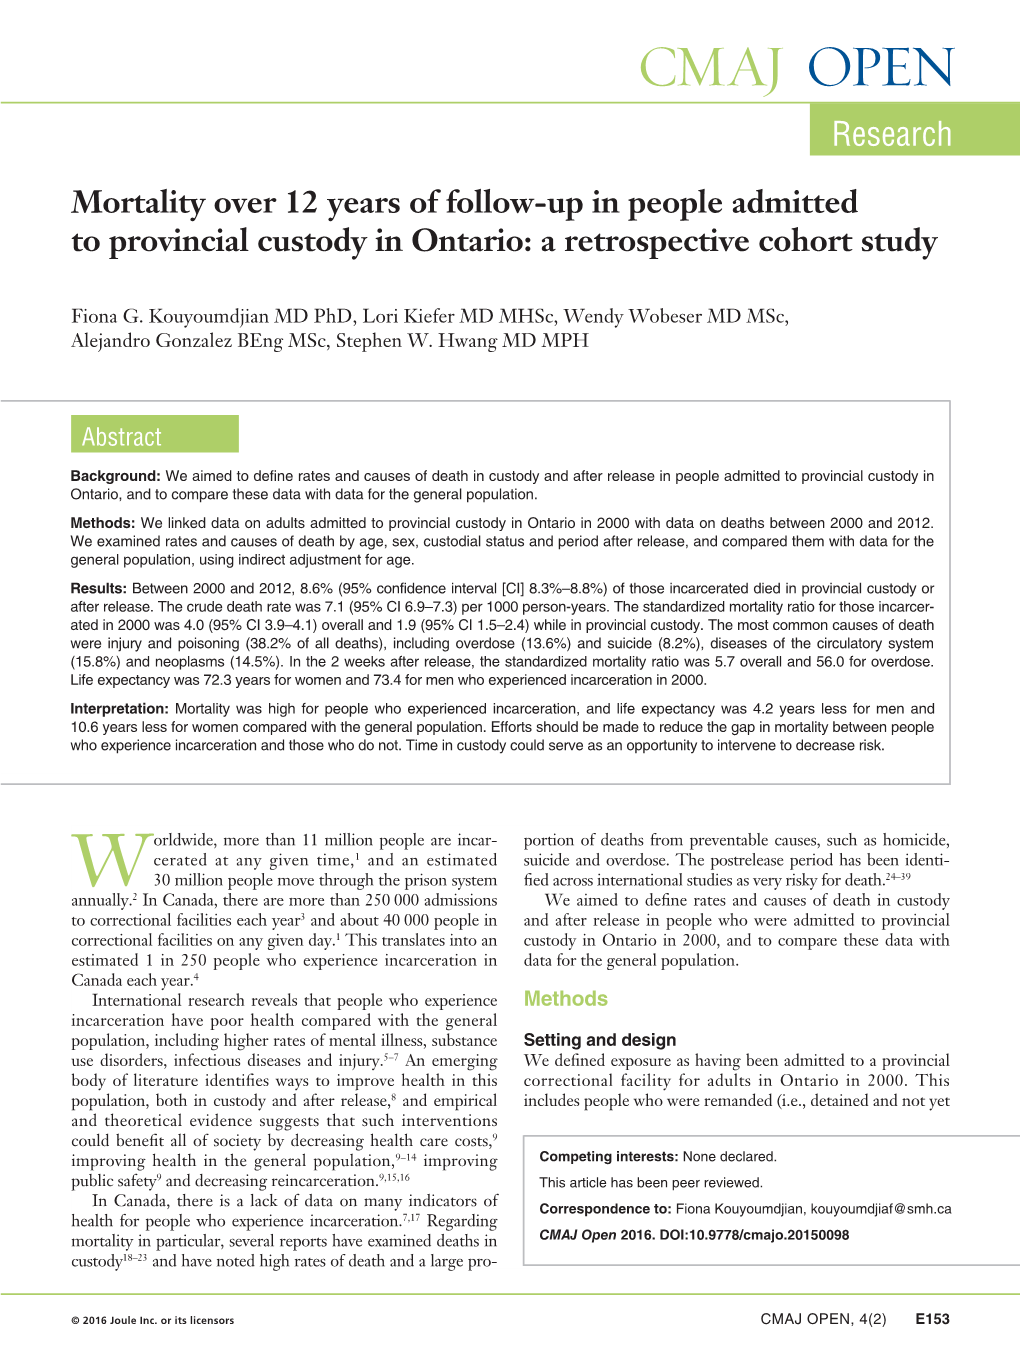 Mortality Over 12 Years of Follow-Up in People Admitted to Provincial Custody in Ontario: a Retrospective Cohort Study